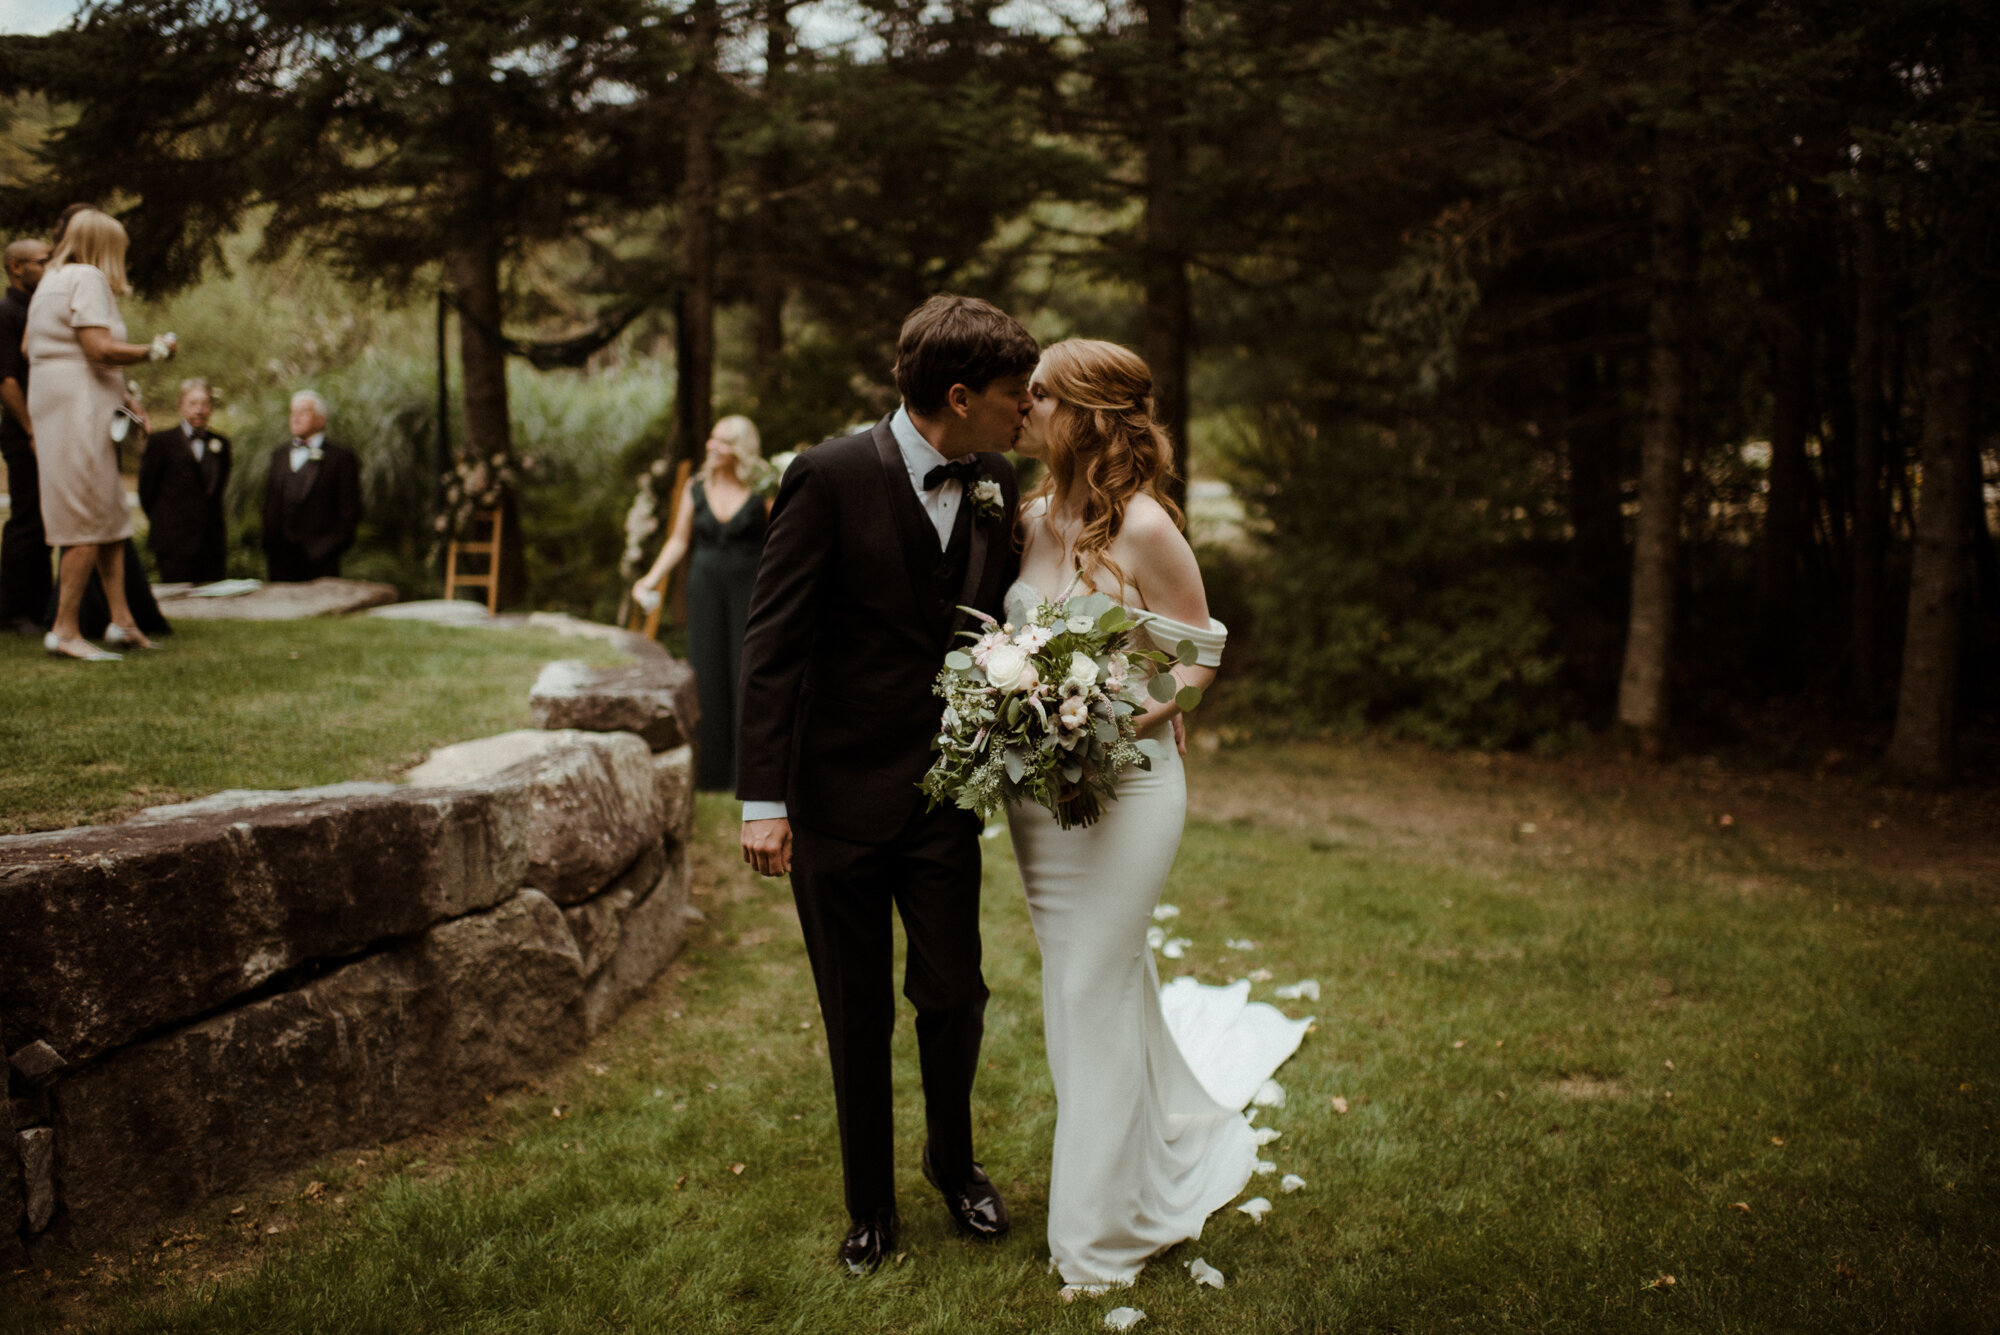 Autumn Elopement in New Hampshire - Backyard Wedding during COVID and Sunrise Hike in Wedding Dress - White Sails Creative_62.jpg